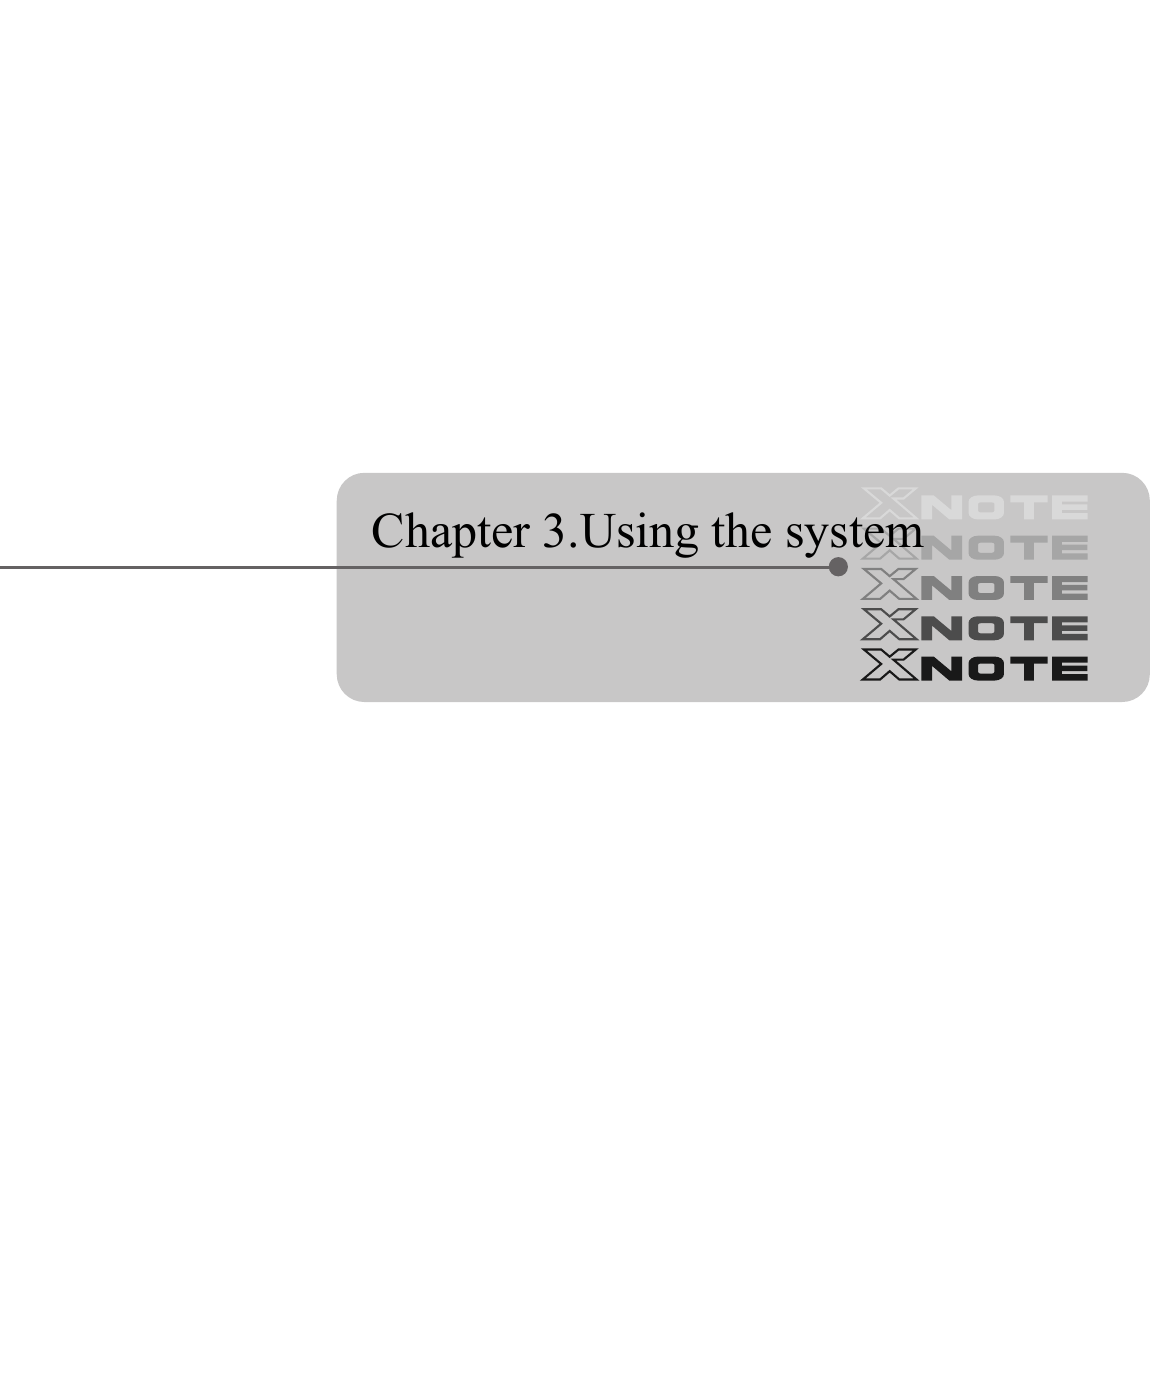  Chapter 3.Using the system